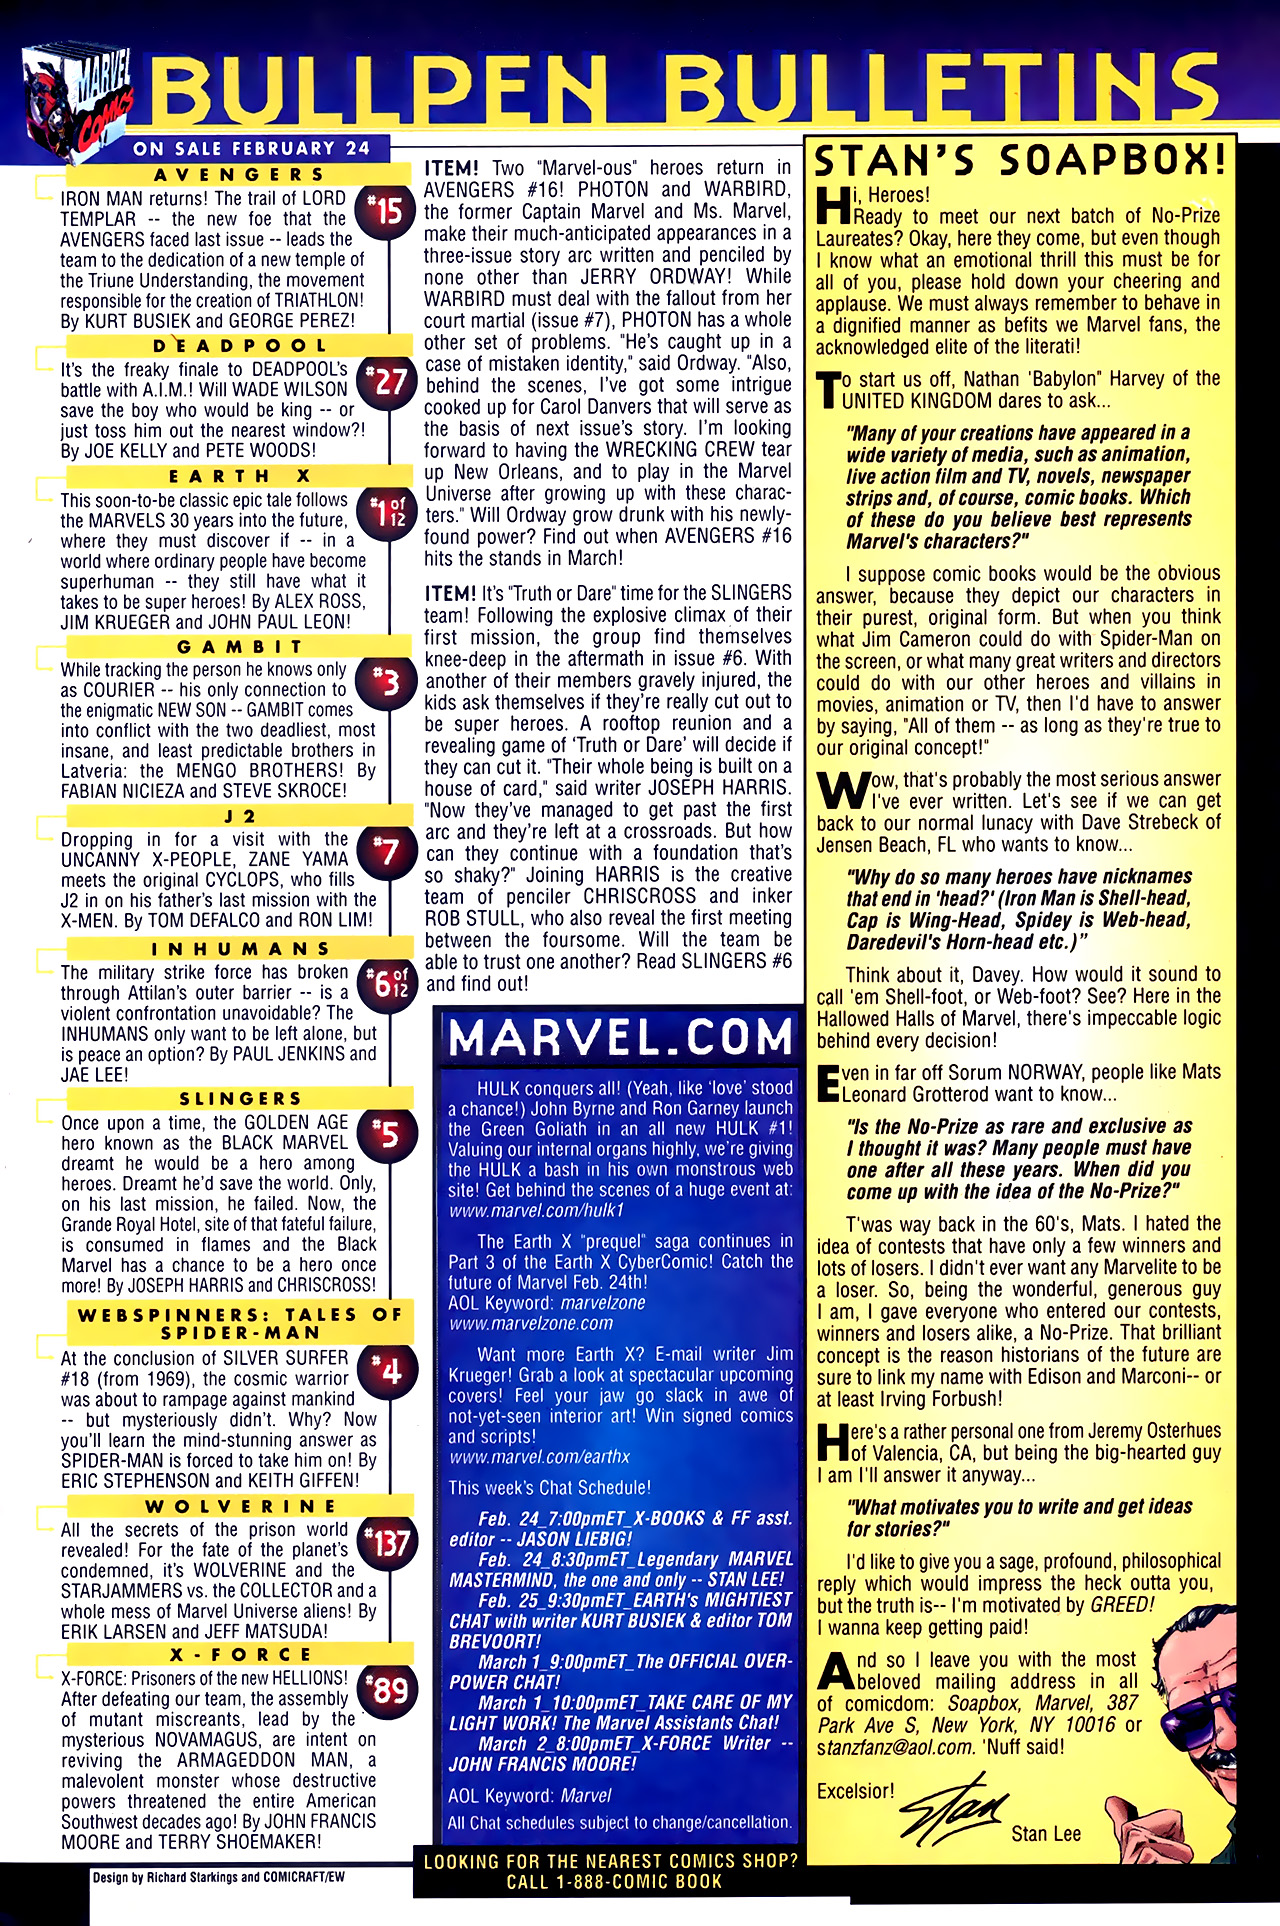 Read online Mutant X comic -  Issue #7 - 24